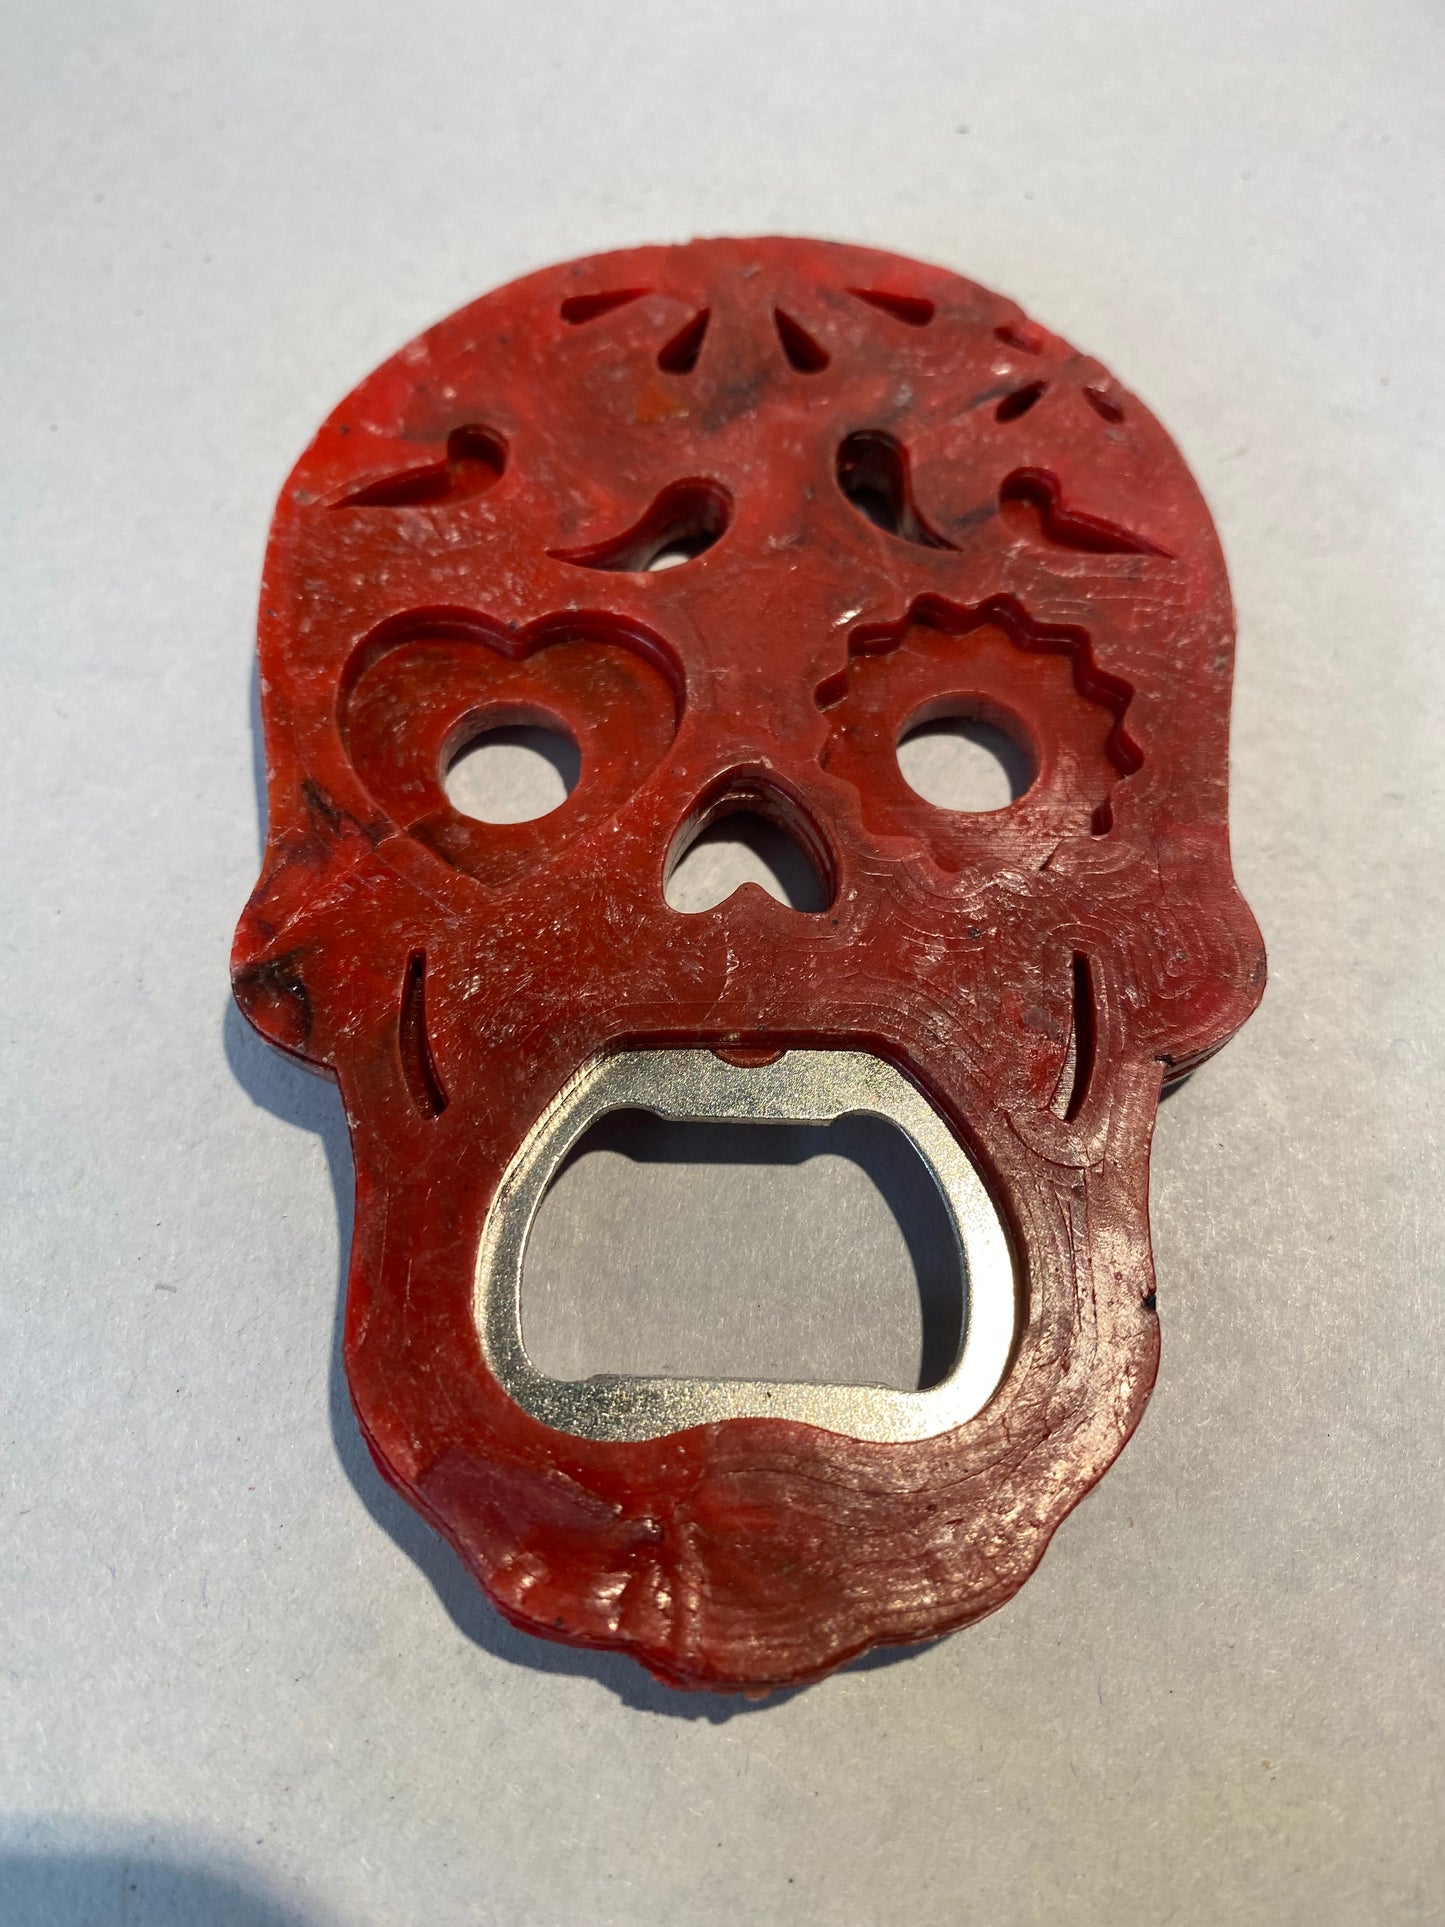 Bottle Opener- recycled plastic - Calaveras for the Day of the Dead